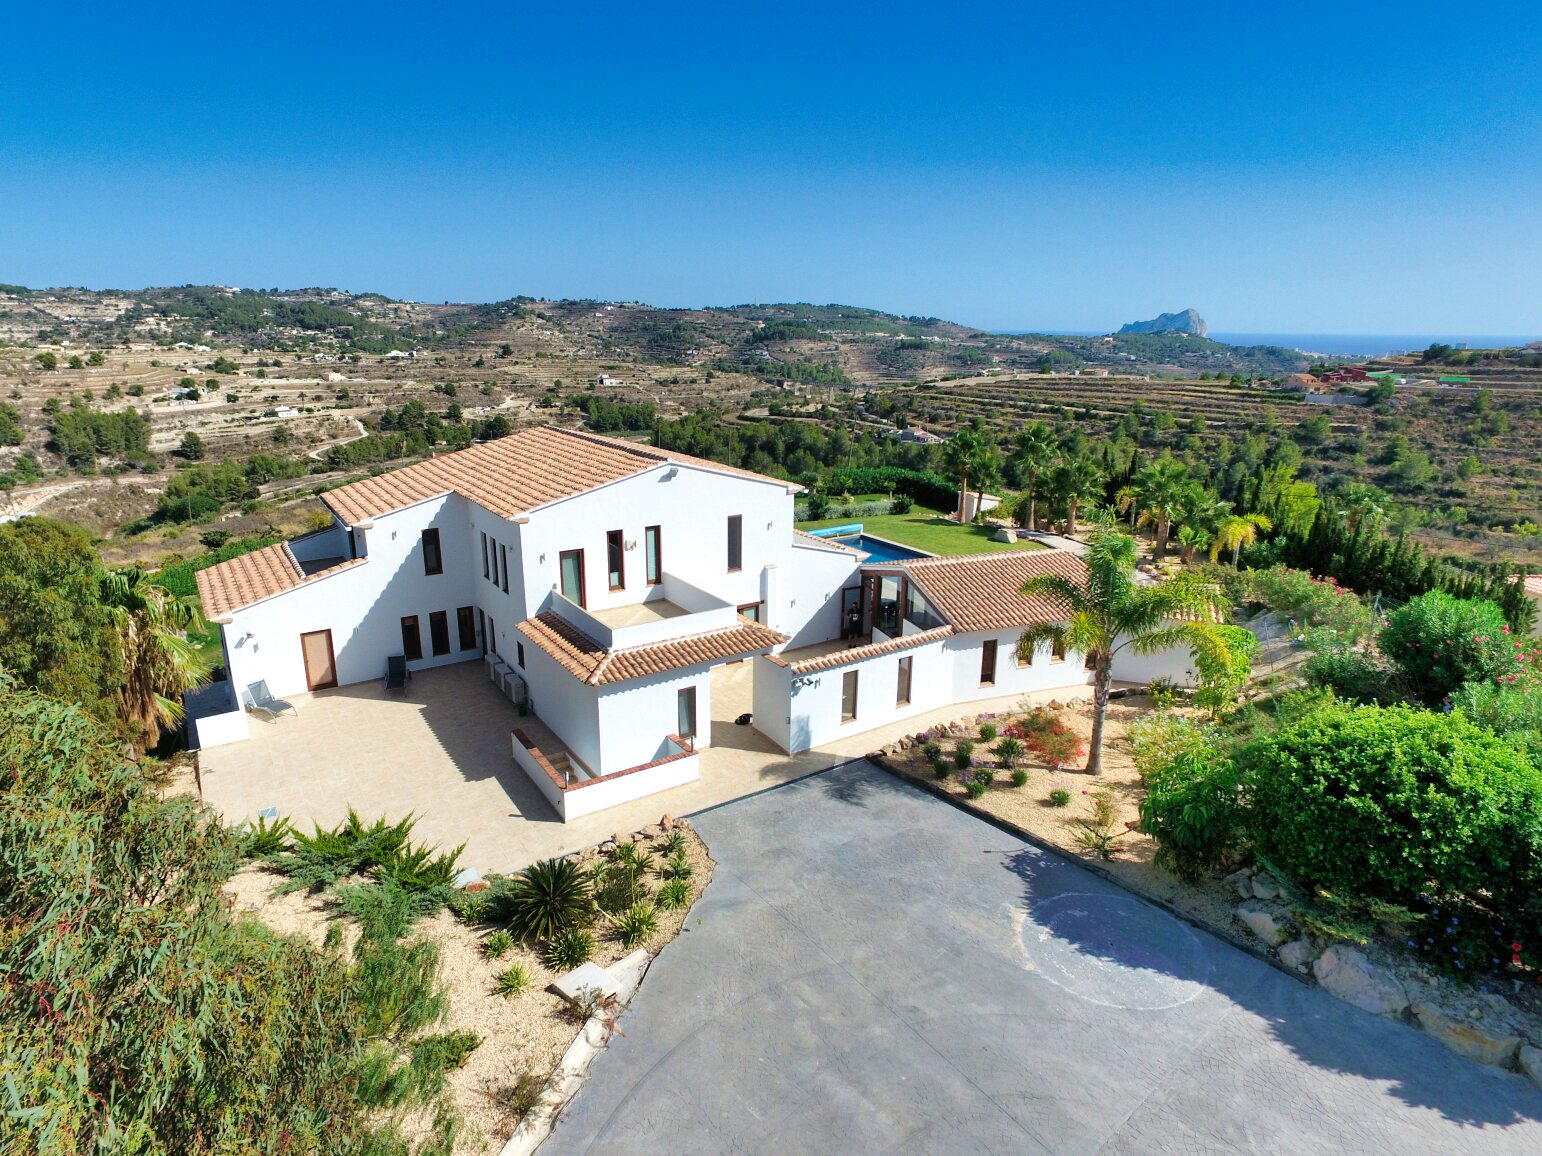 Amazing Finca in Benissa with a 13.000sqm flat plot and sea views